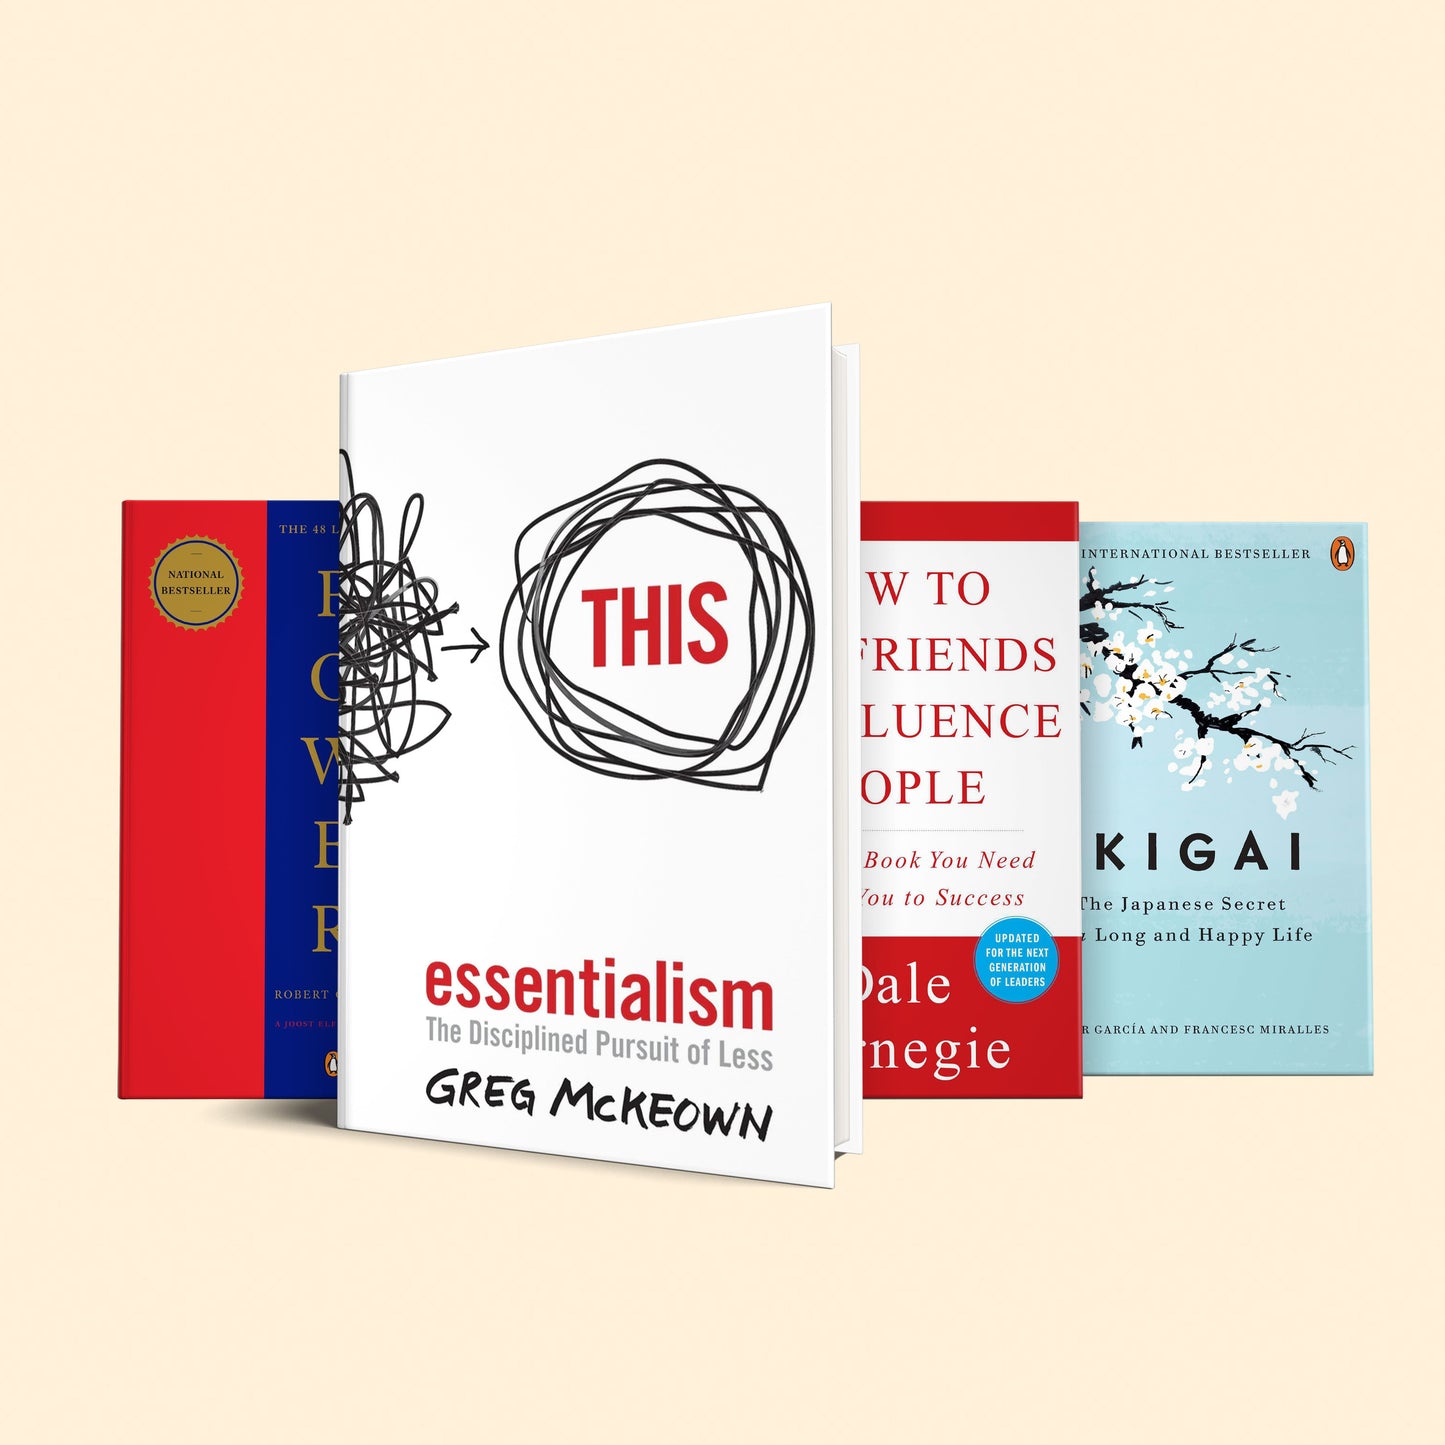 4 inspiring Books to Help You Become the Person You Want to Be : Essentialism, How to win friends & influence people, 48 laws of power, ikigai